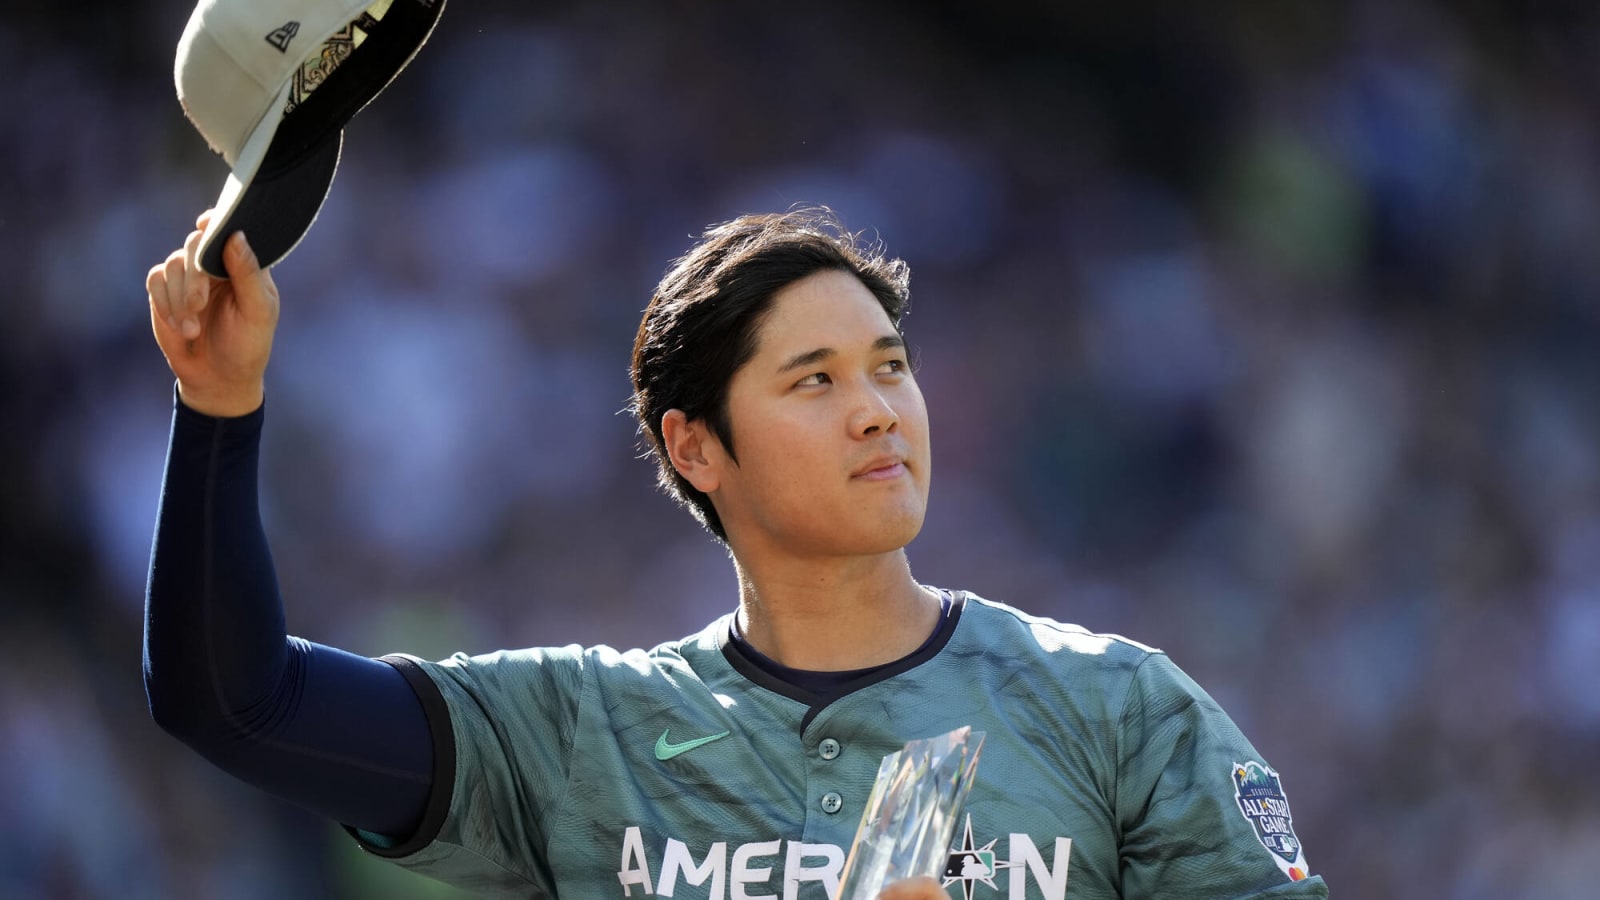 Yankees linked as top team for potential Shohei Ohtani trade